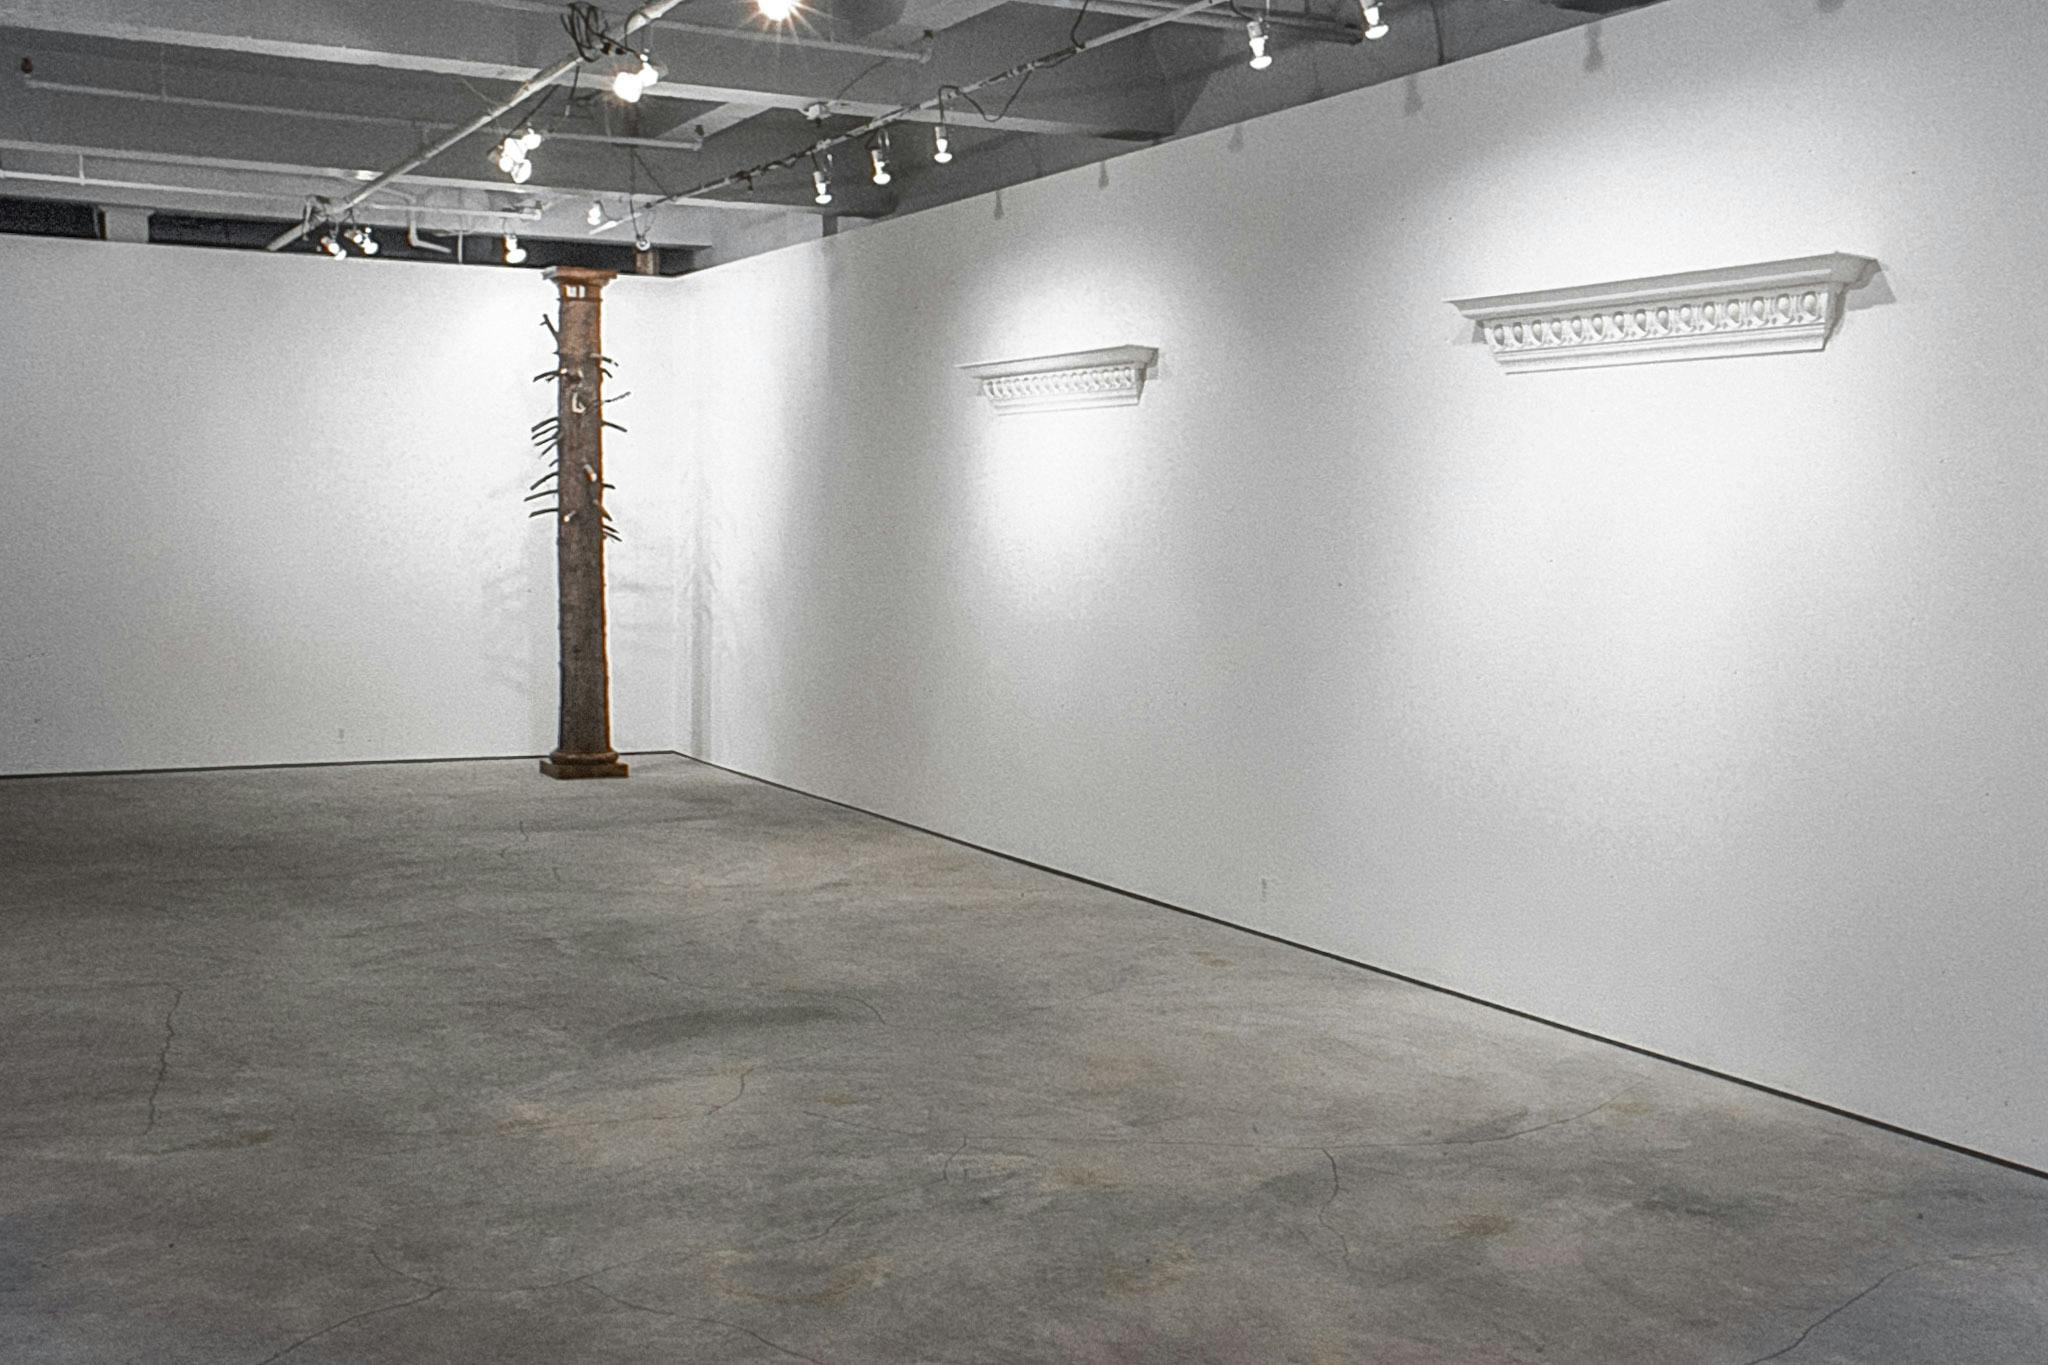 In a gallery, there are 2 ornate crown mouldings with partway up one wall, with small spaces in them where eggs rest. By another wall, there is a column made of a tree trunk with partial branches. 